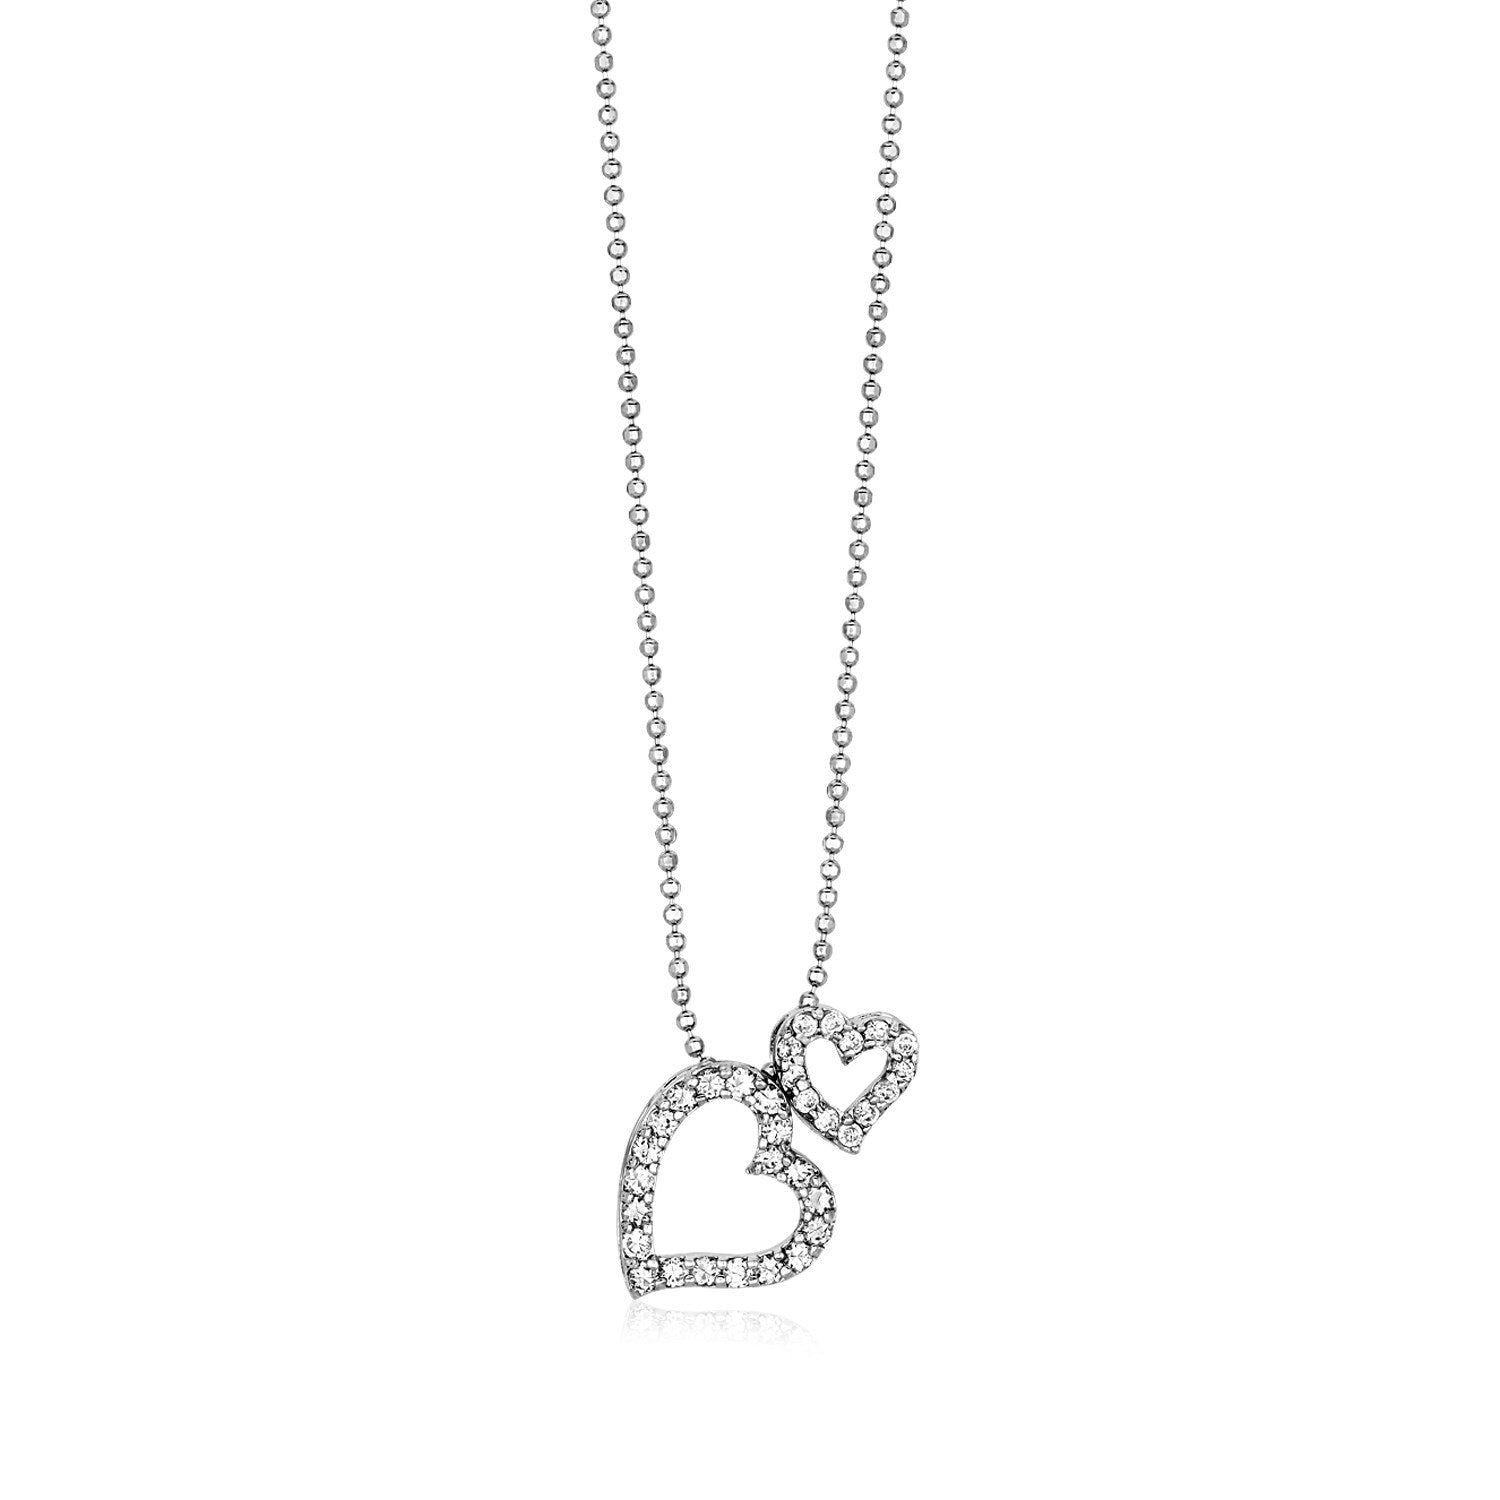 Sterling Silver Necklace with Two Open Hearts and Cubic Zirconias, size 18''